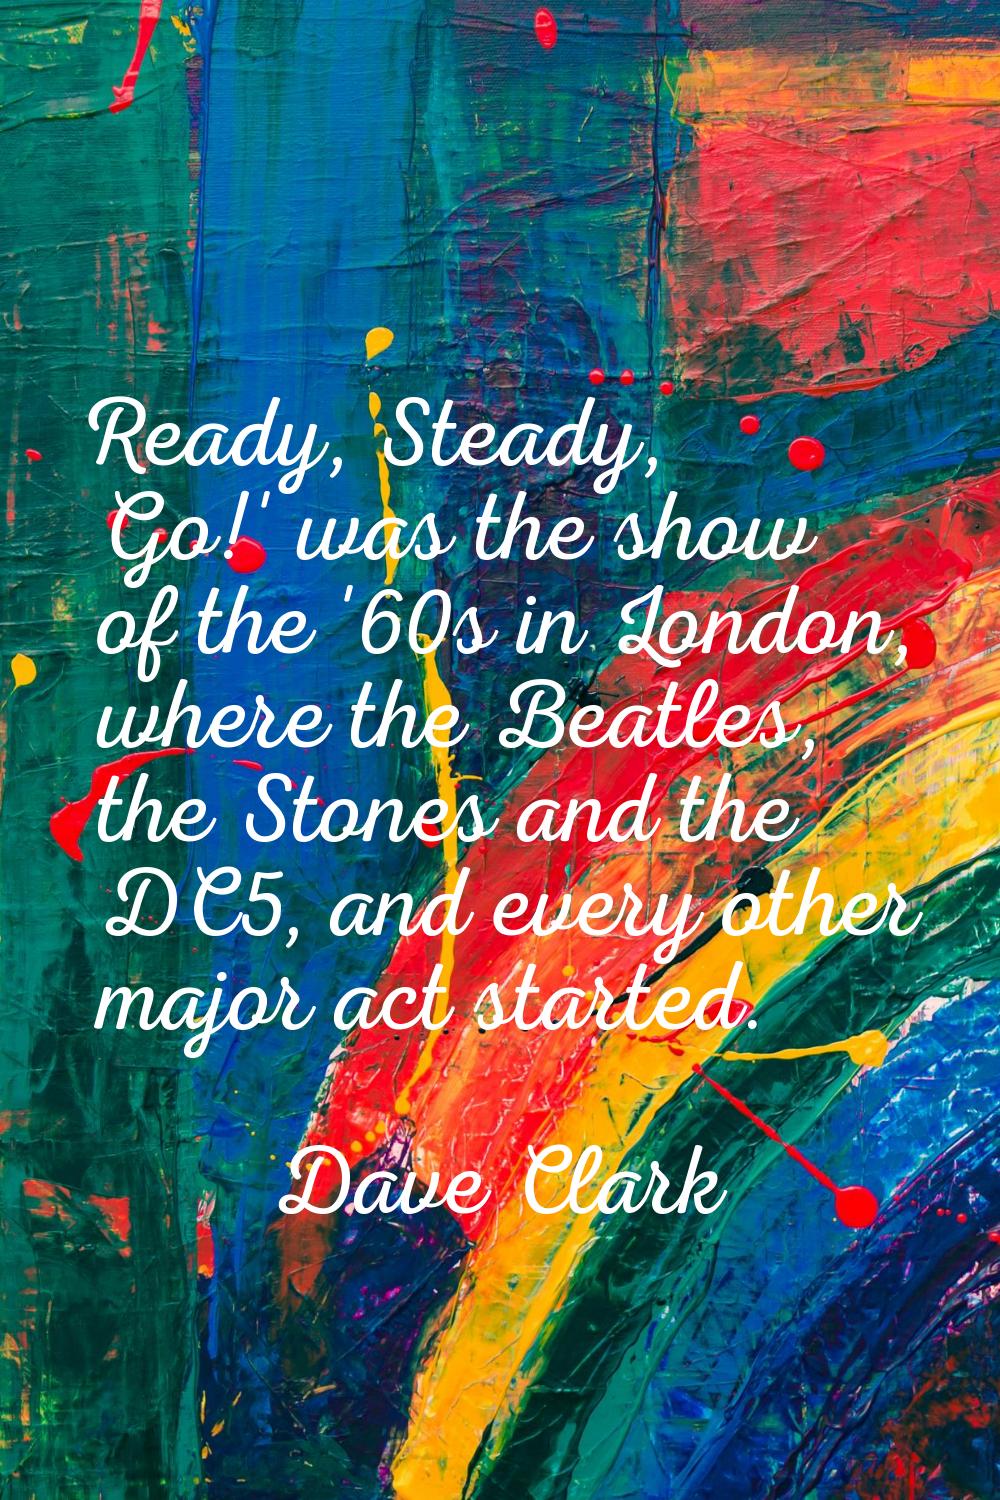 Ready, Steady, Go!' was the show of the '60s in London, where the Beatles, the Stones and the DC5, 